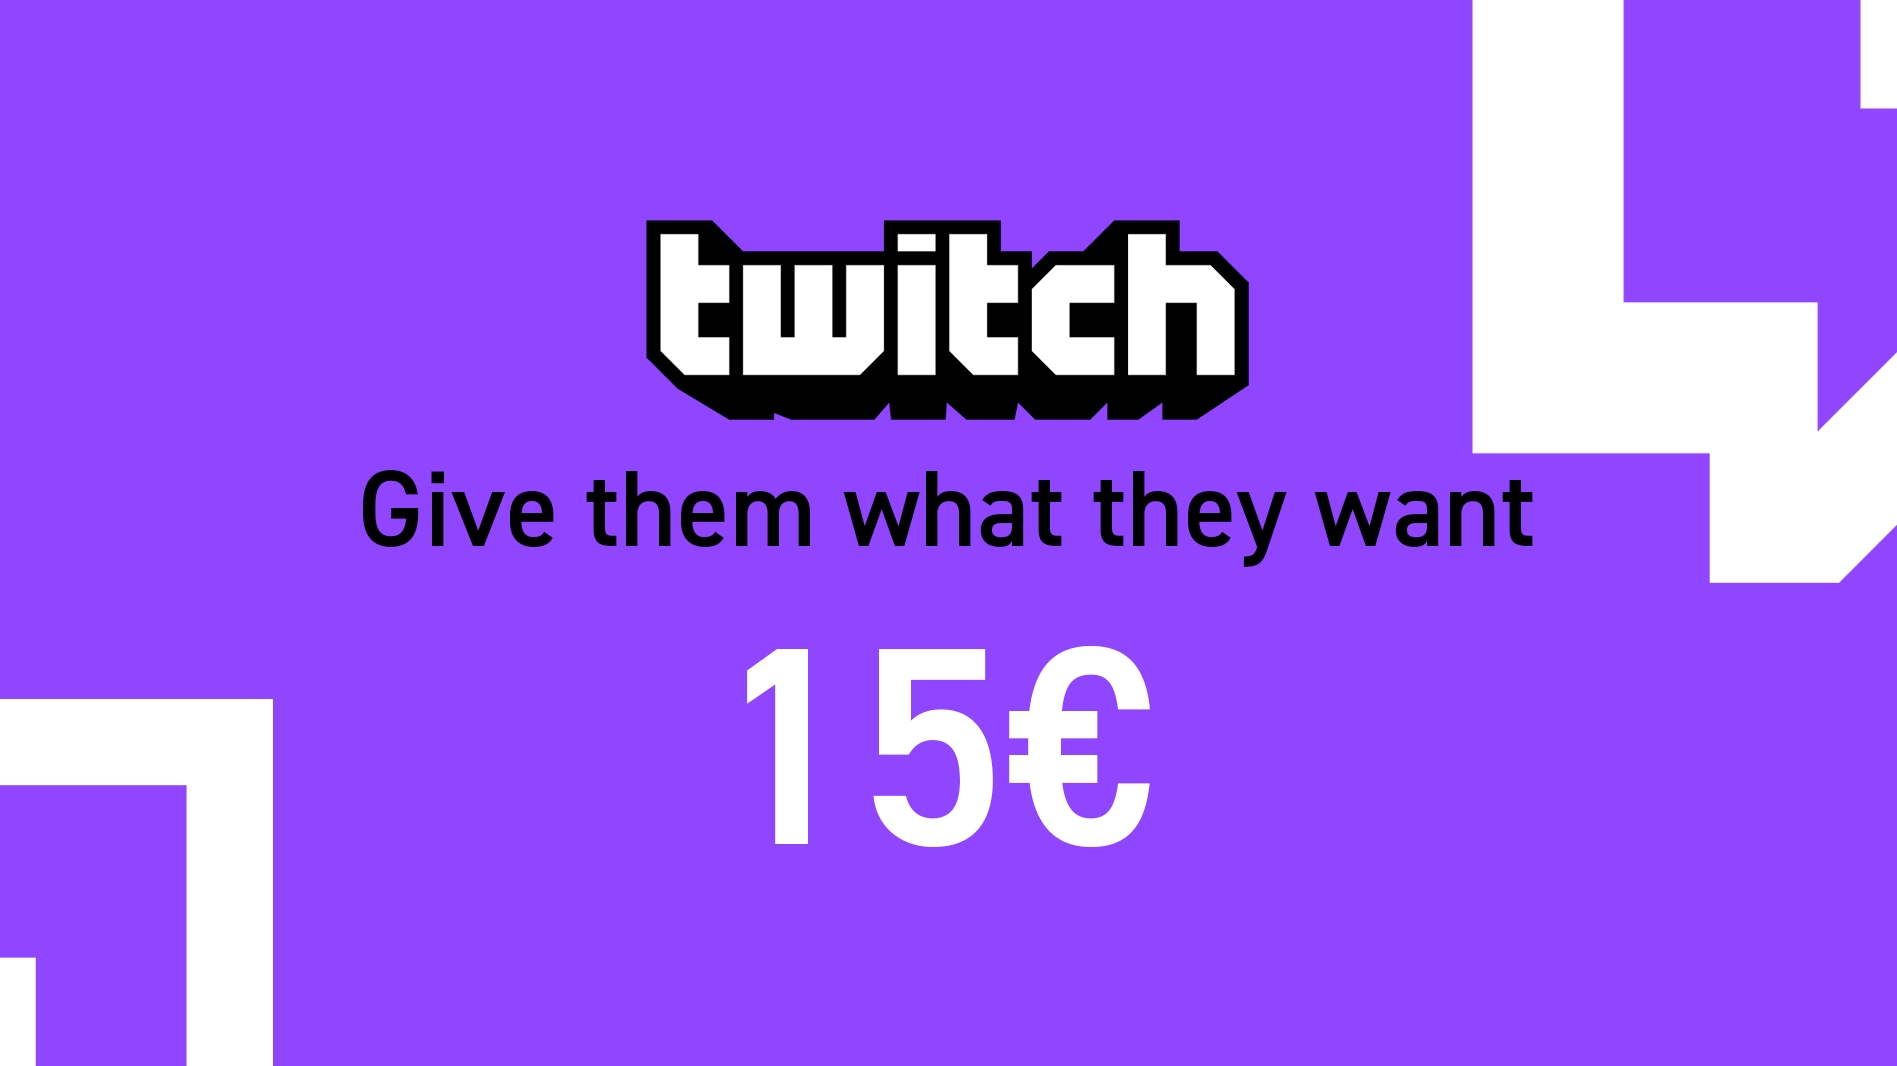 Card Twitch Kaufe Other 15€ Gift